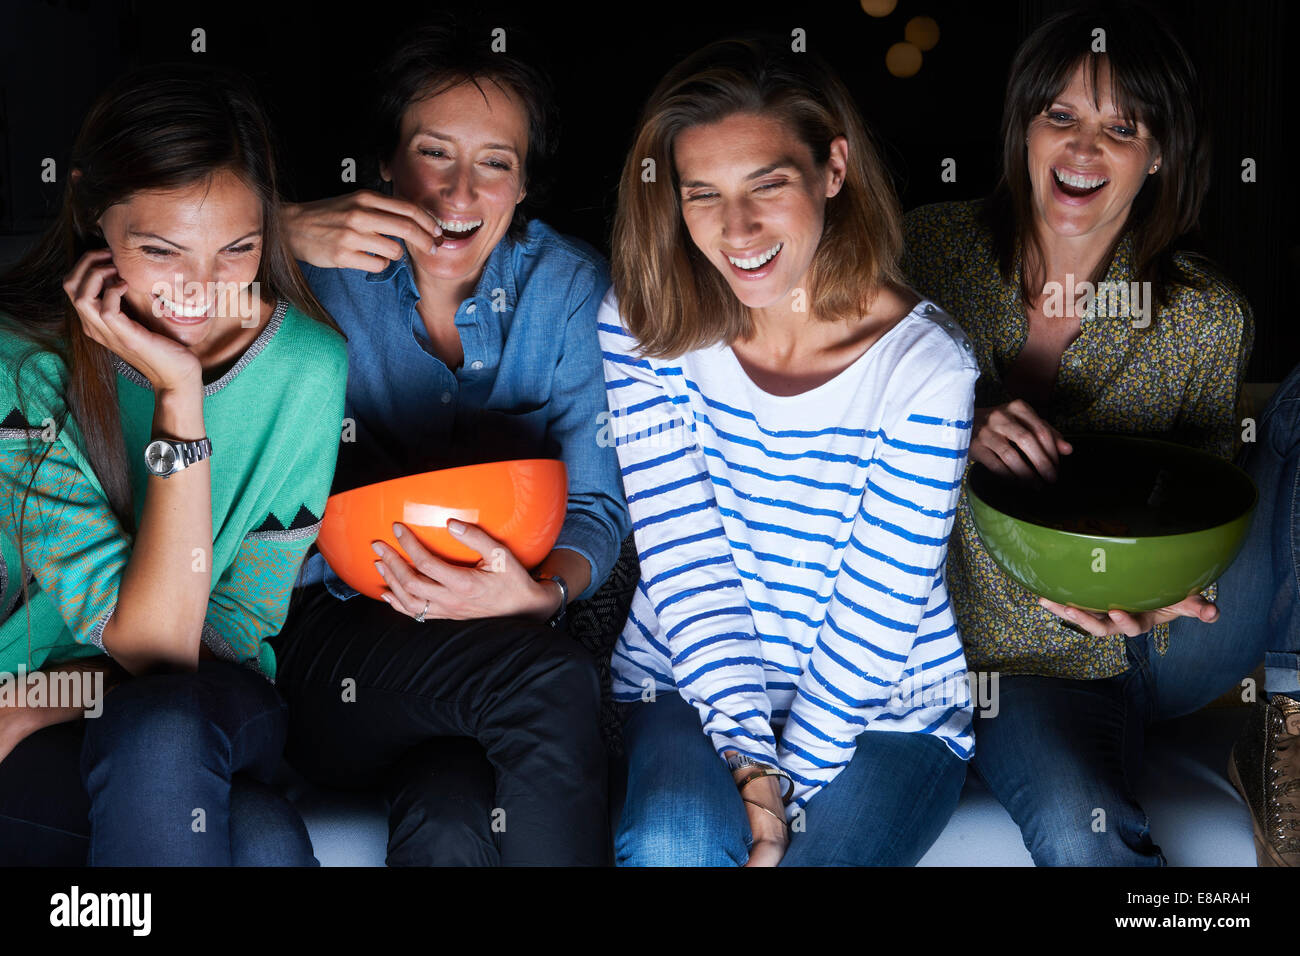 Four women laughing and watching TV with snack bowls Stock Photo